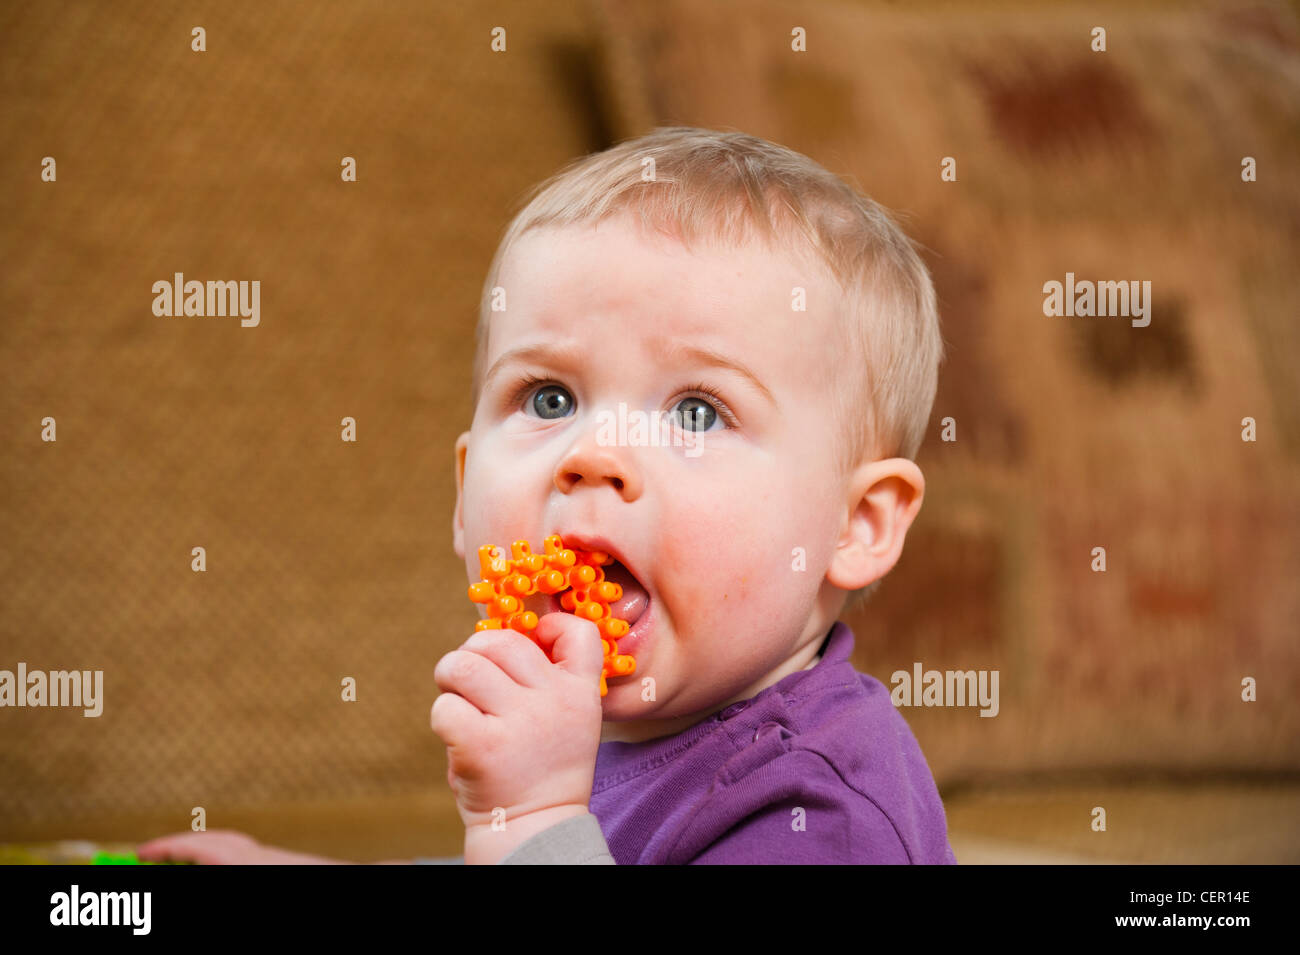 One year old baby boy with building brick in mouth Stock Photo